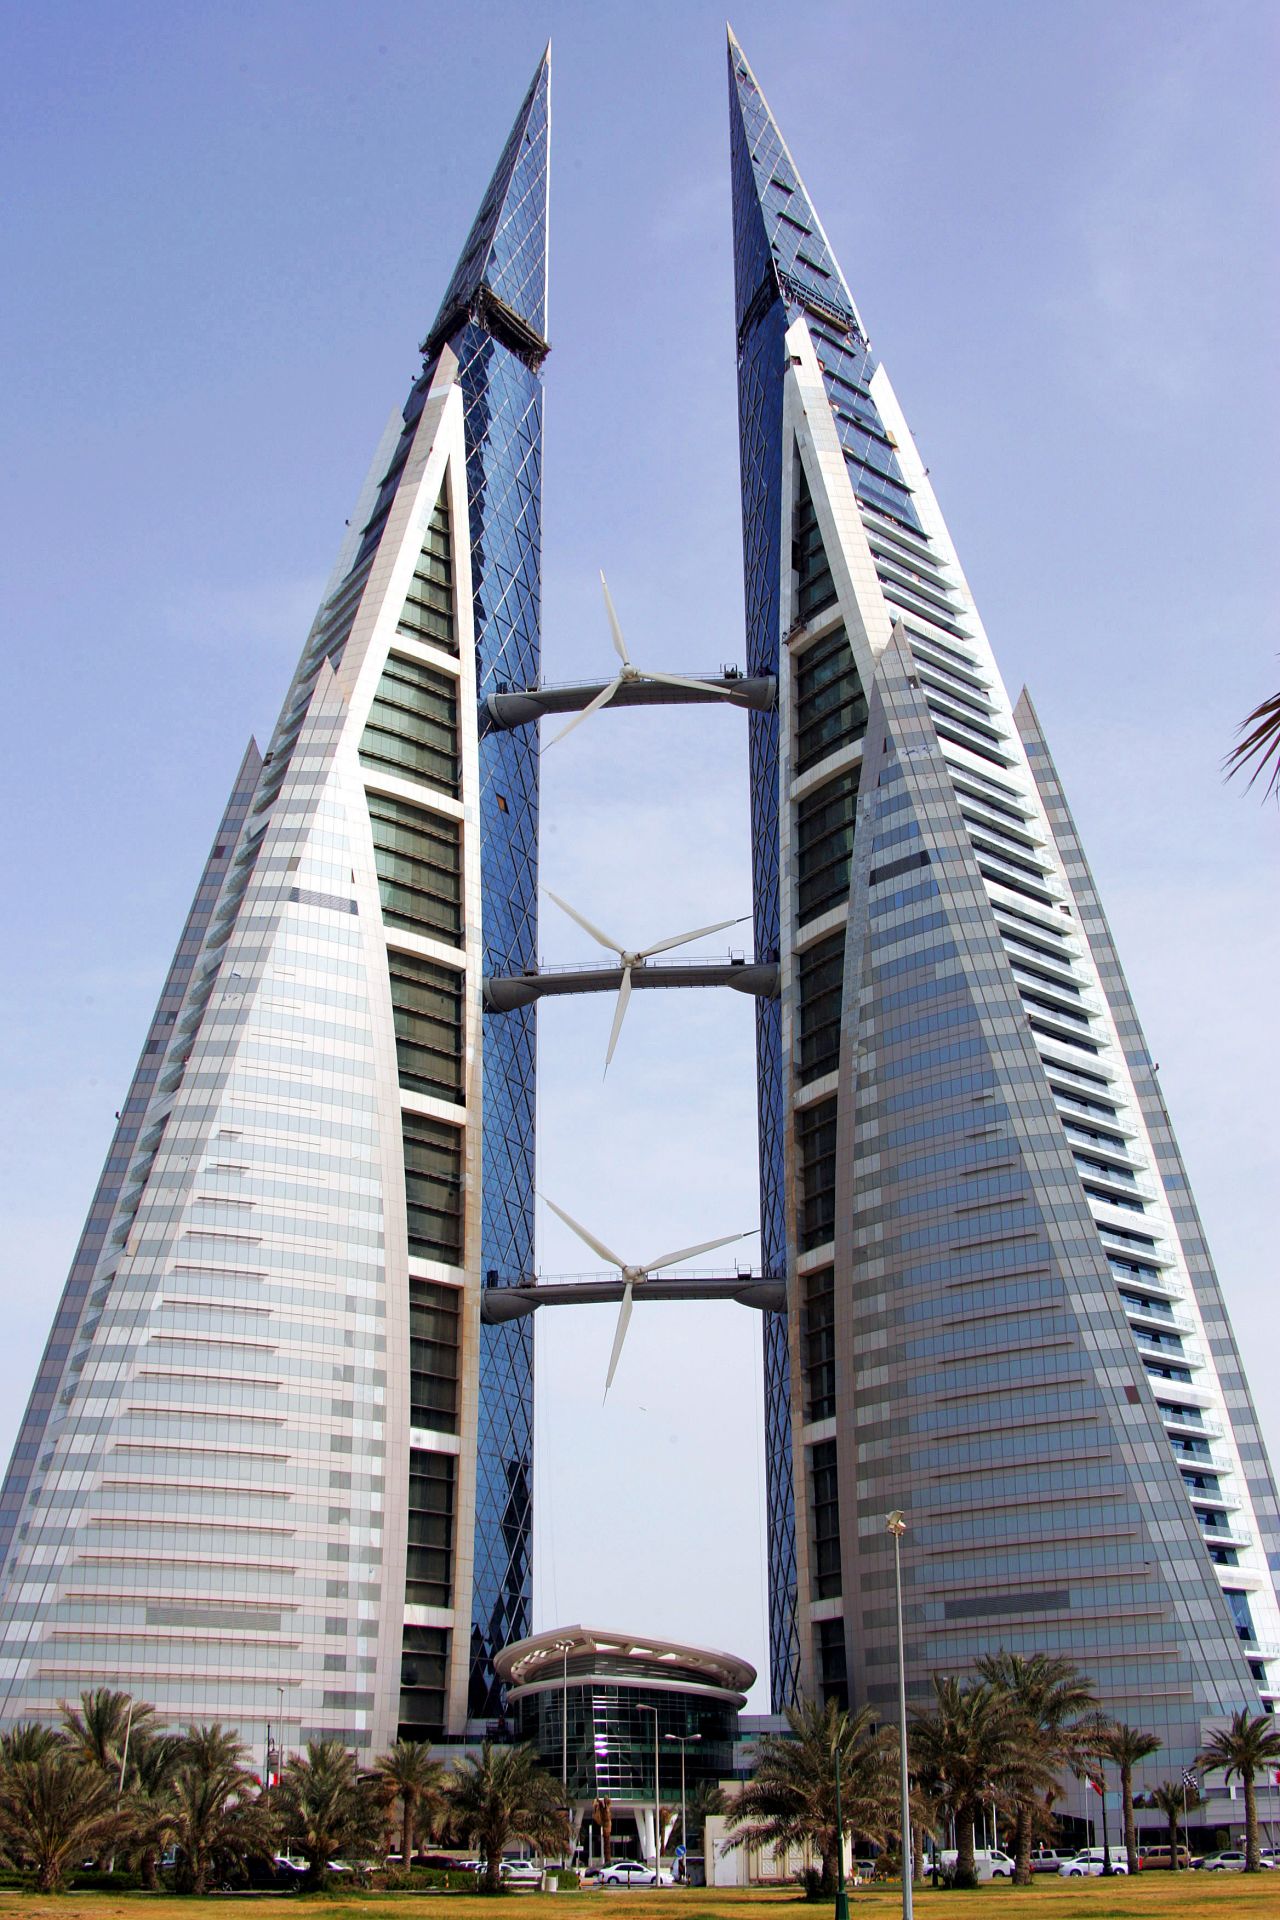 The World Trade Center in Bahrain integrated wind turbines into its design.